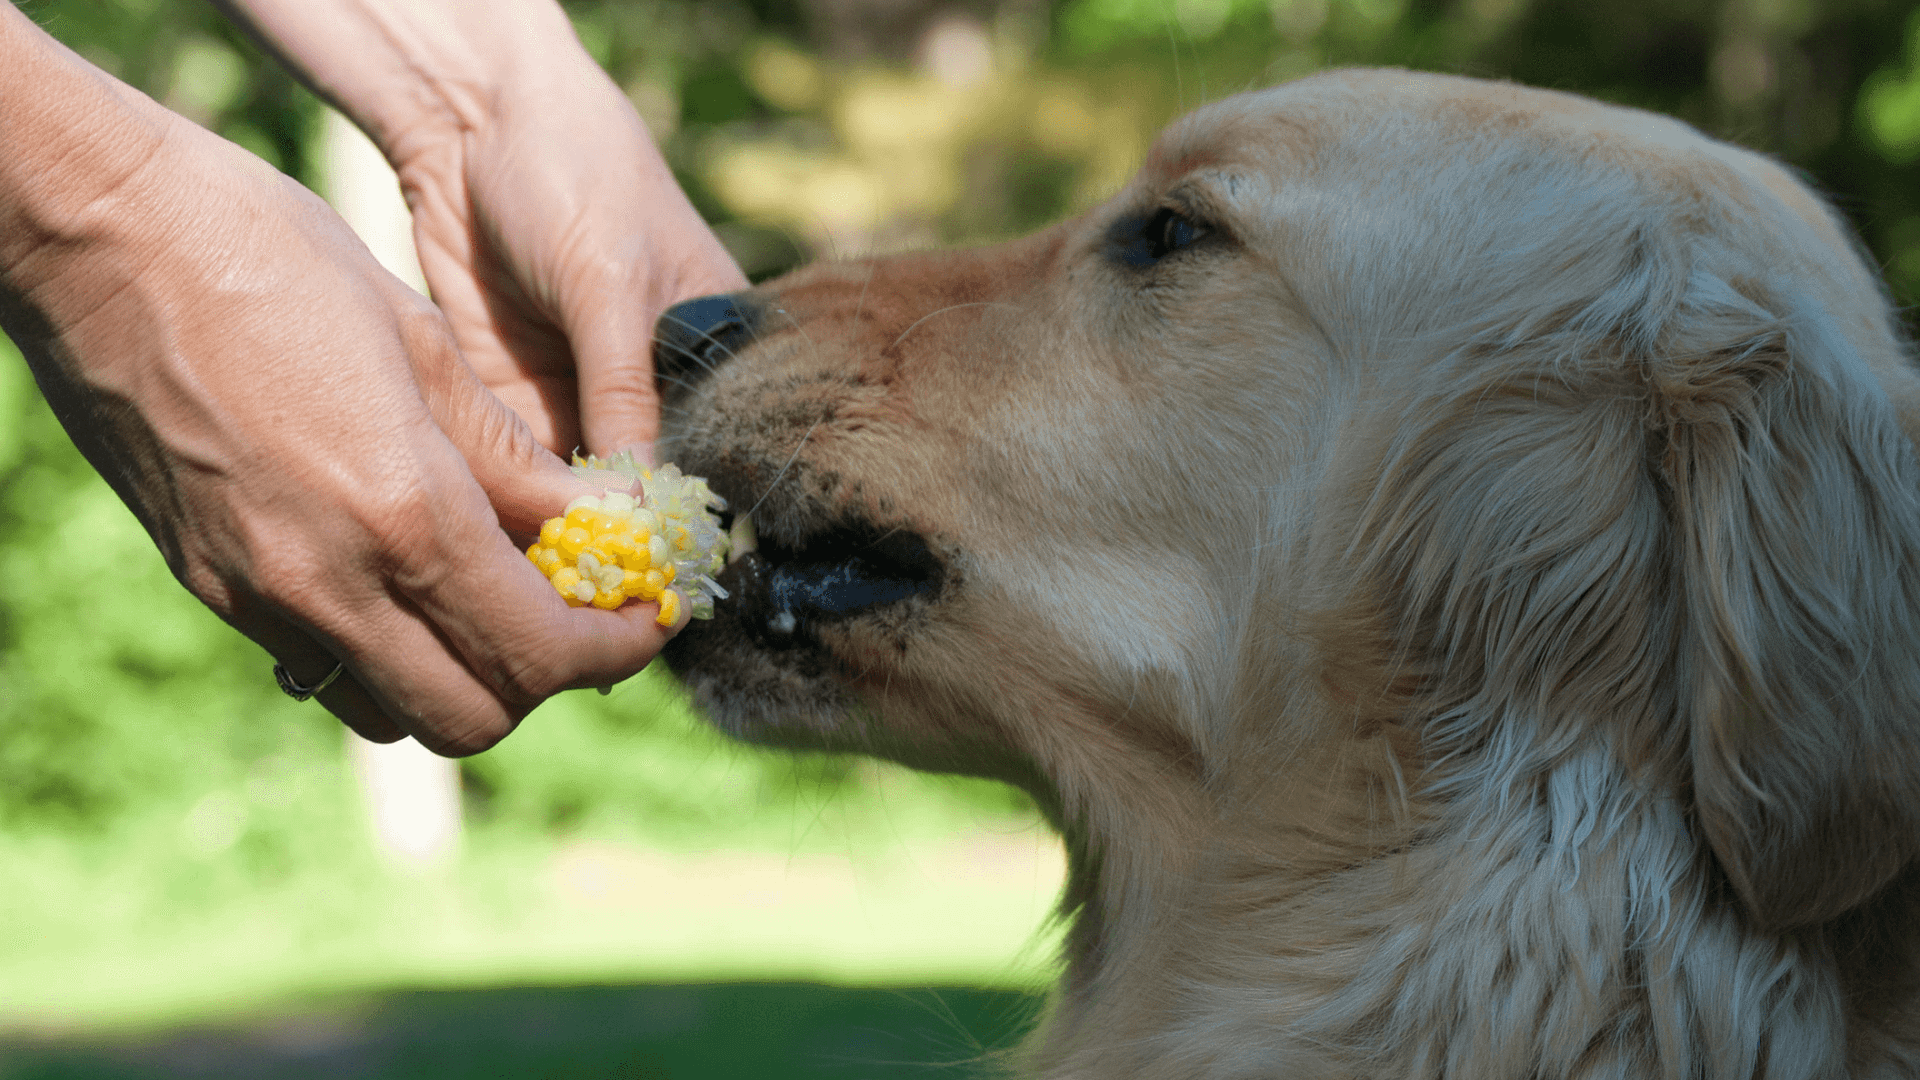 Innovation in the Pet Food Industry – Healthy, Organic… even Vegan.